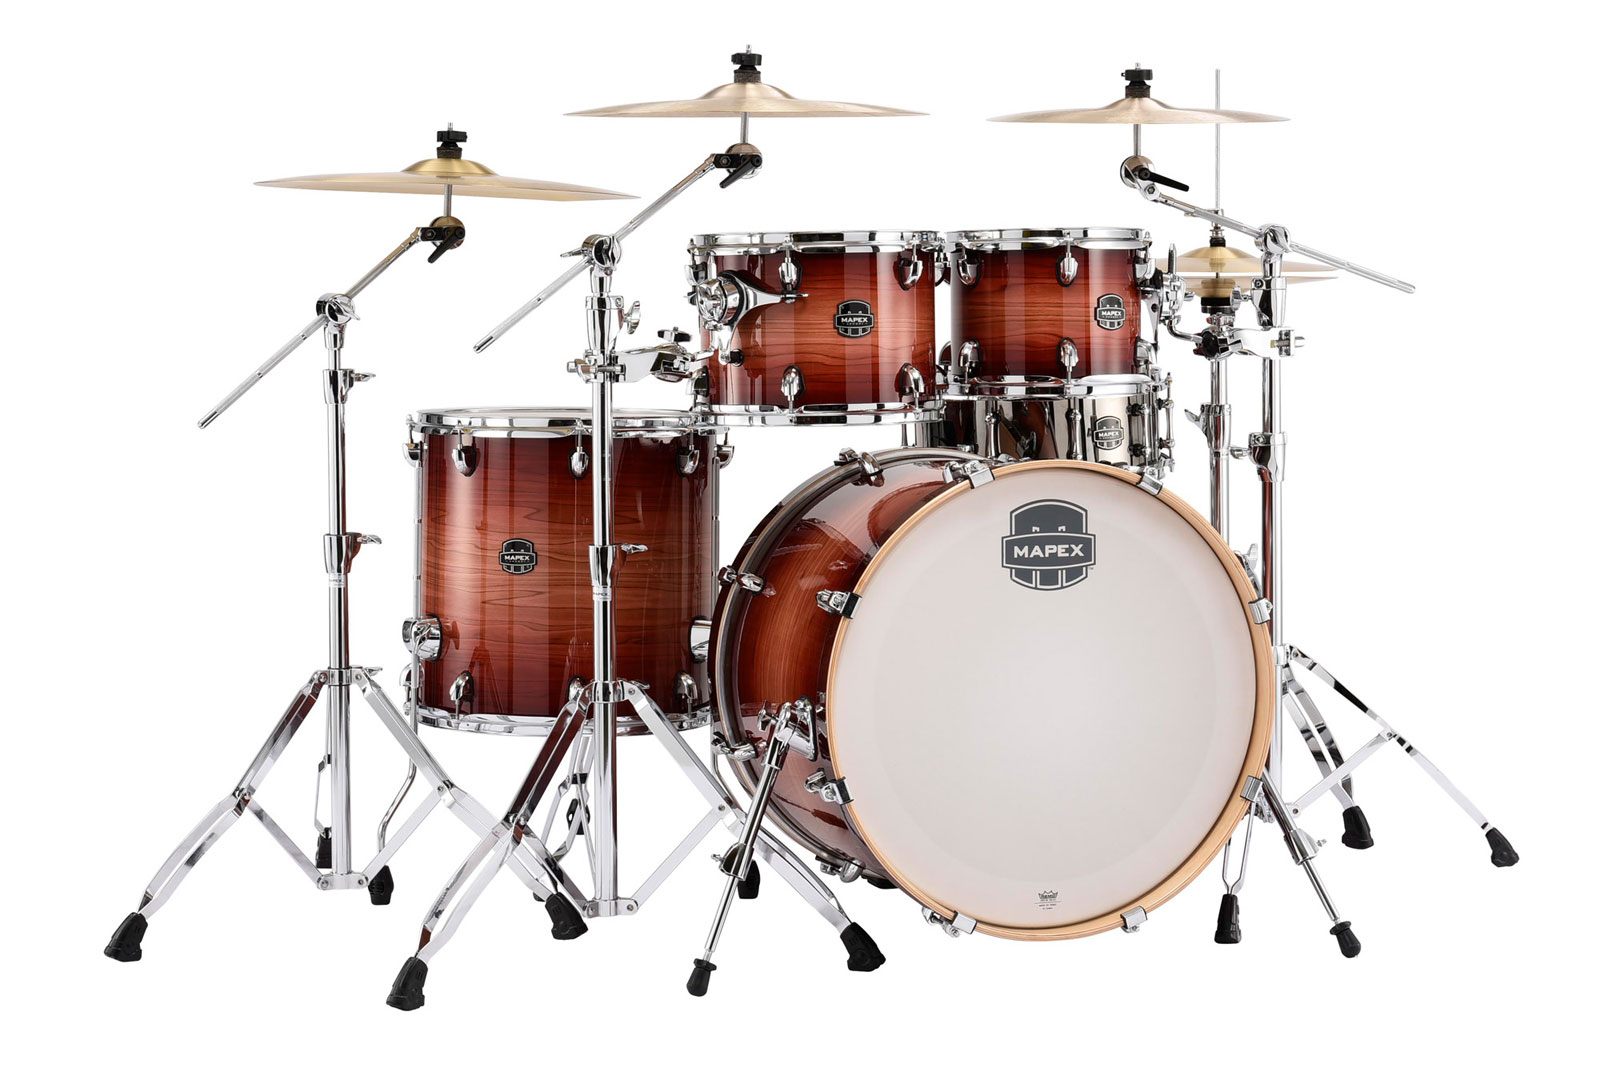 MAPEX AR529S-DW - ARMORY 5 SHELLS STAGE ROCK 22 ROUGE REDWOOD BURST (WITHOUT HARDWARE)